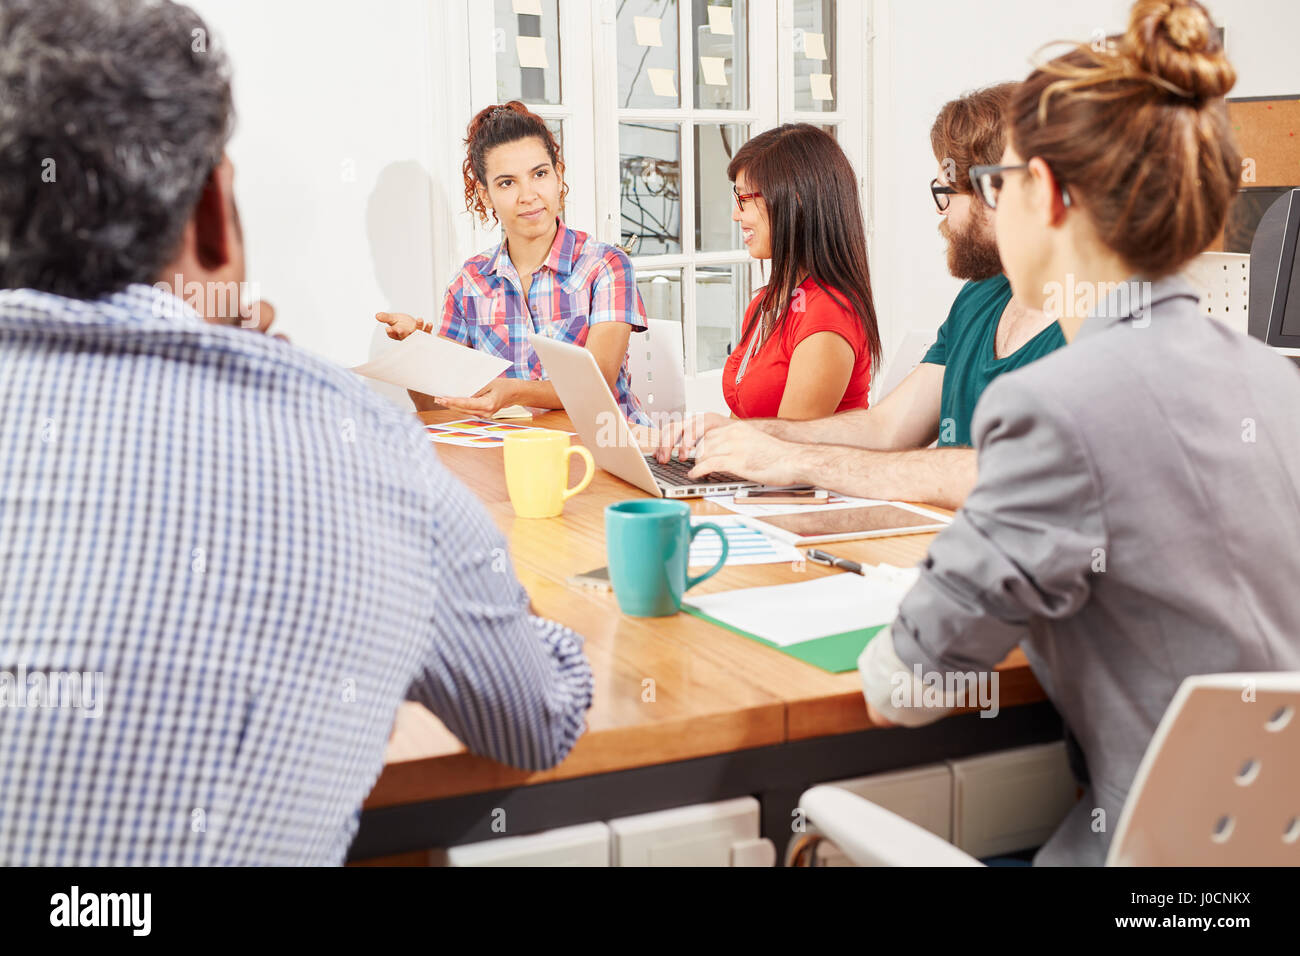 Business people in creative meeting as a team Stock Photo